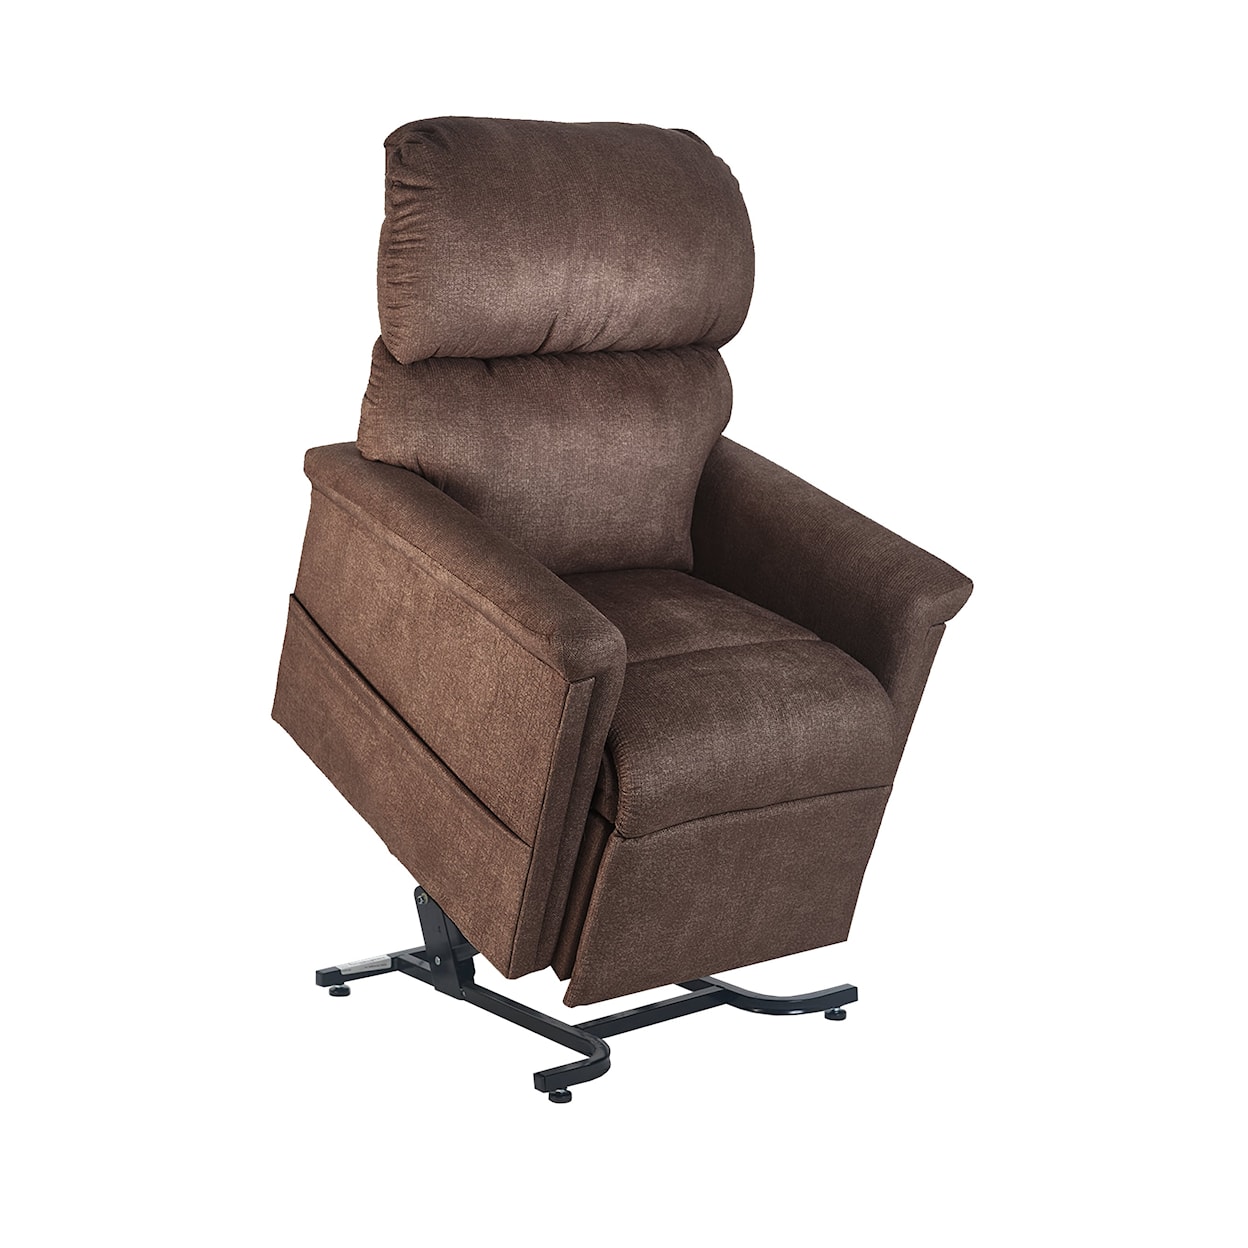 UltraComfort Mona Lift Recliner with Heat and Massage